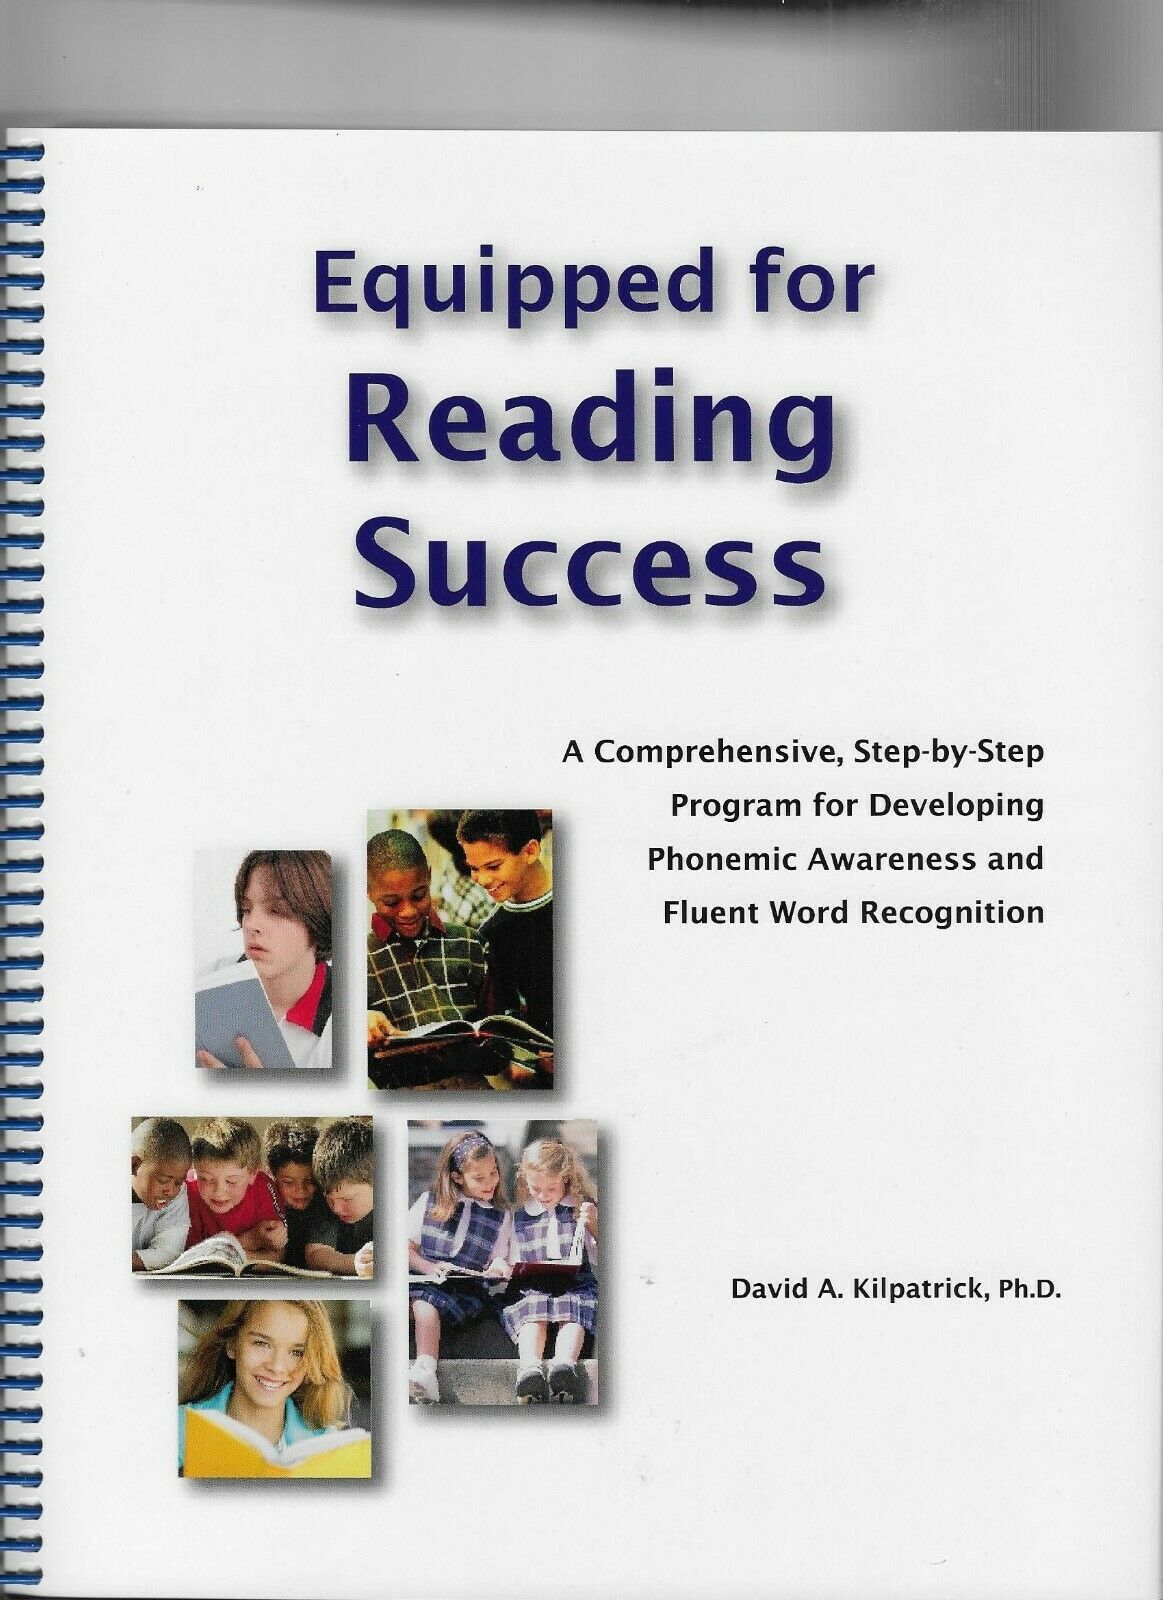 equipped for reading success